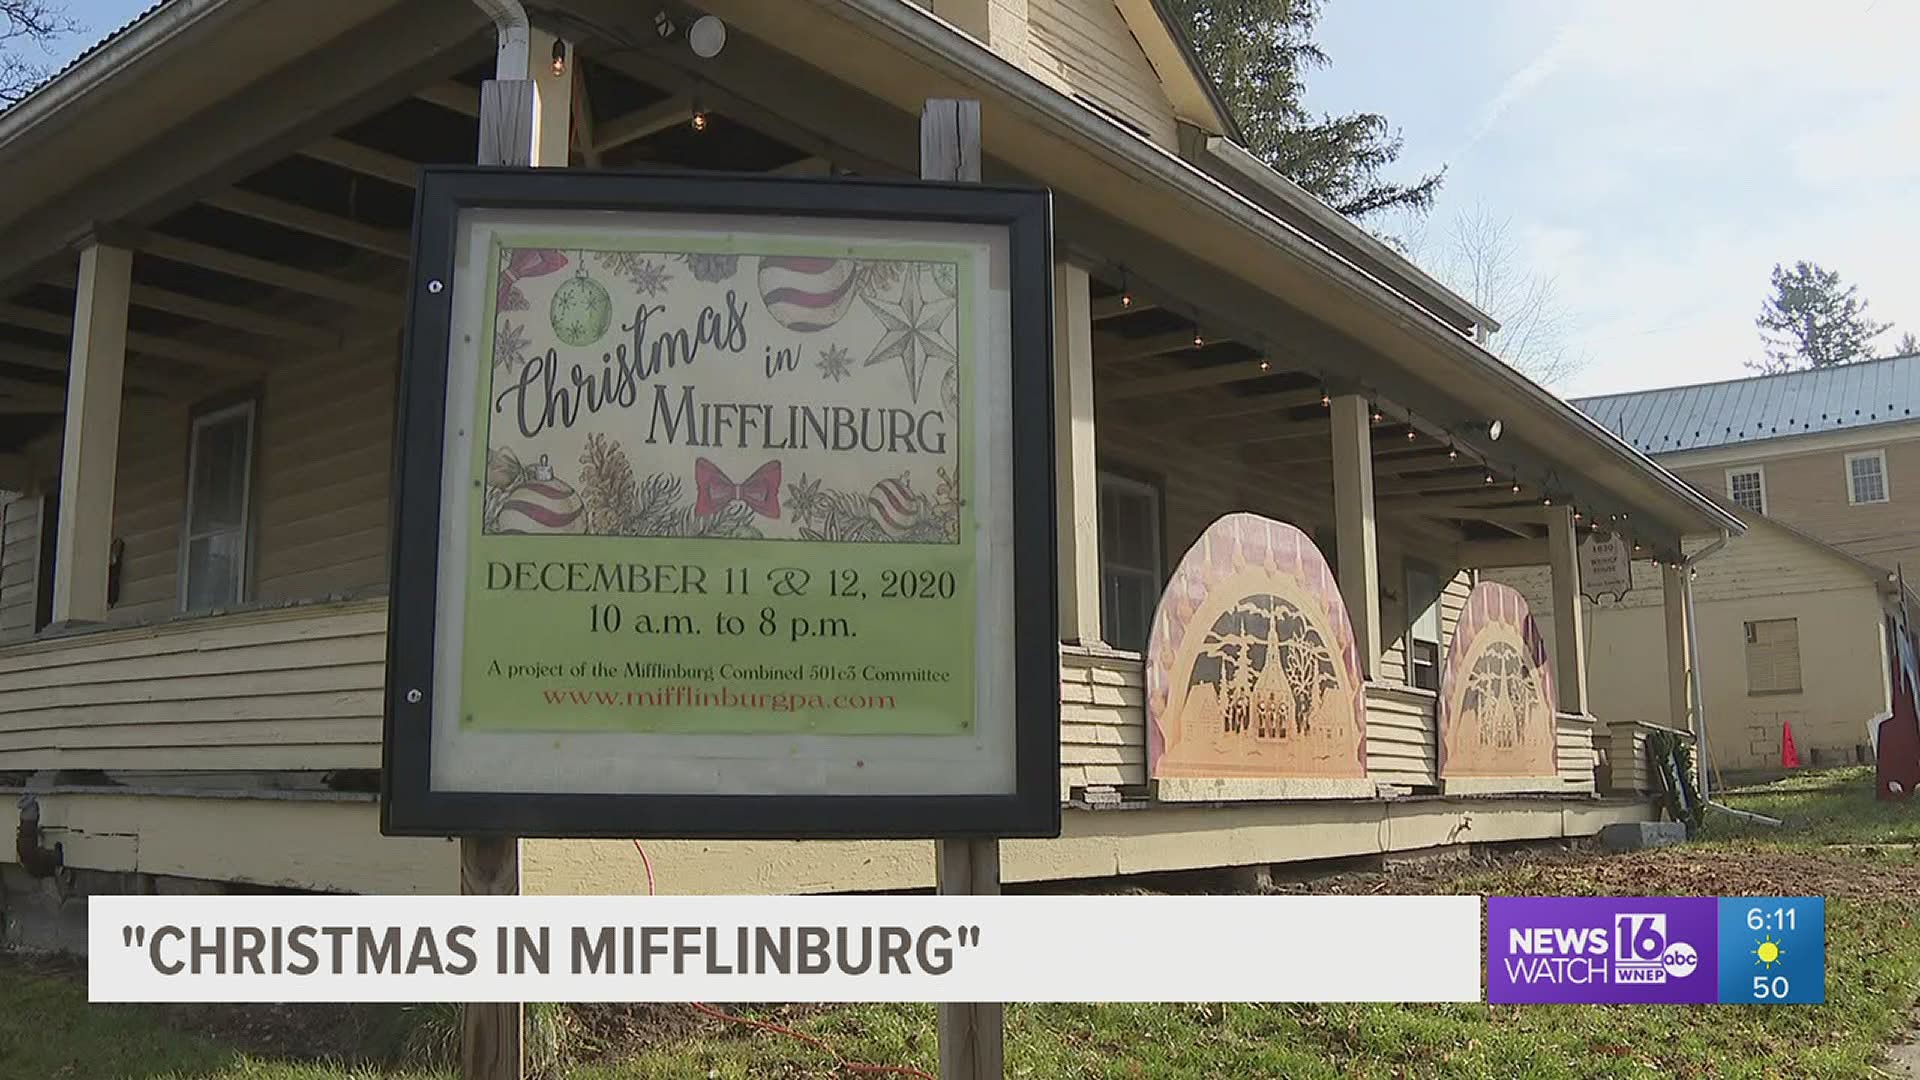 The annual Christkindl Market was canceled because of the pandemic, so a smaller event is taking place this weekend in Mifflinburg.